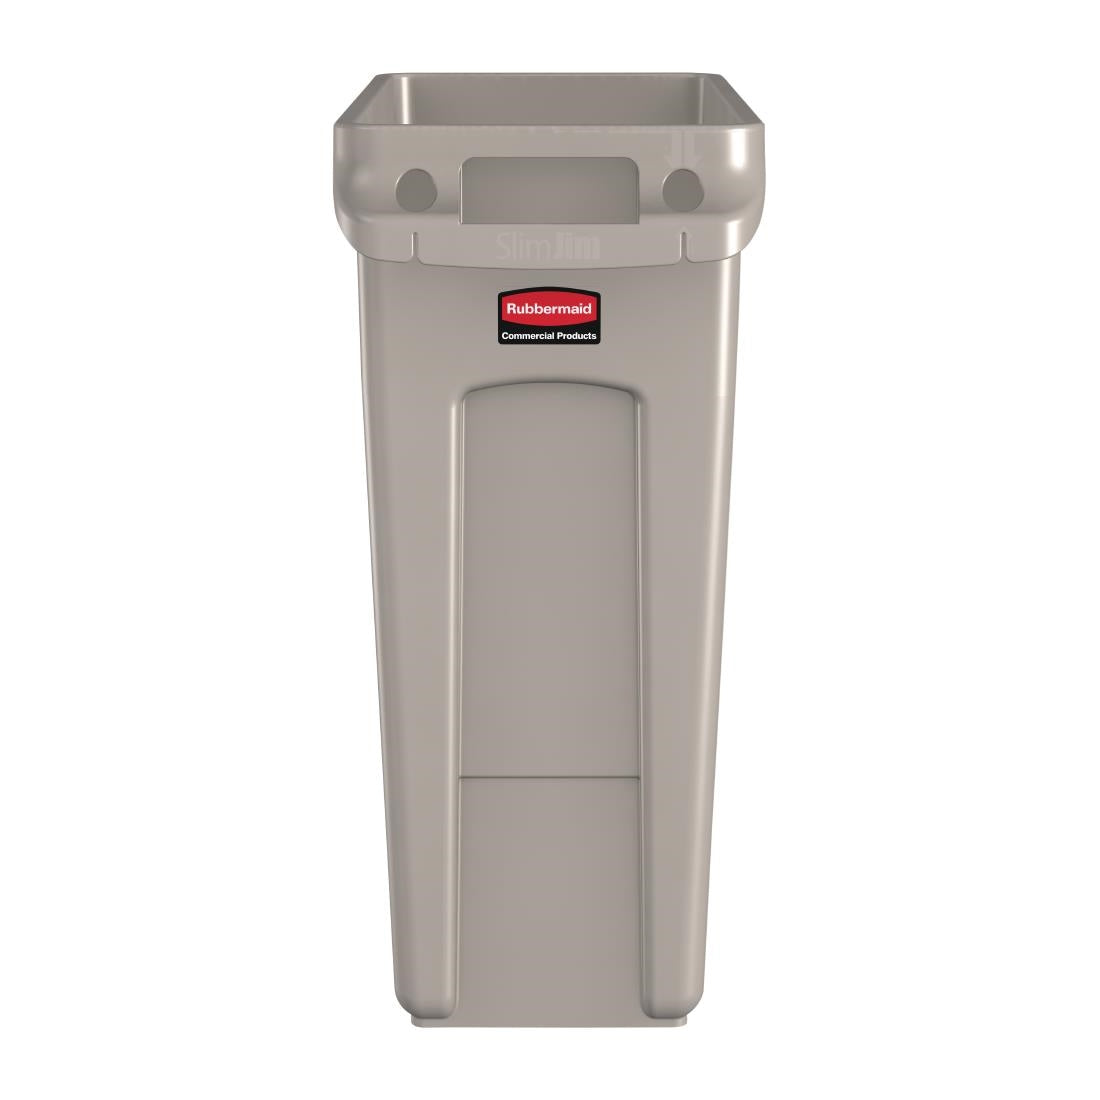 DY112 Rubbermaid Slim Jim Container With Venting Channels